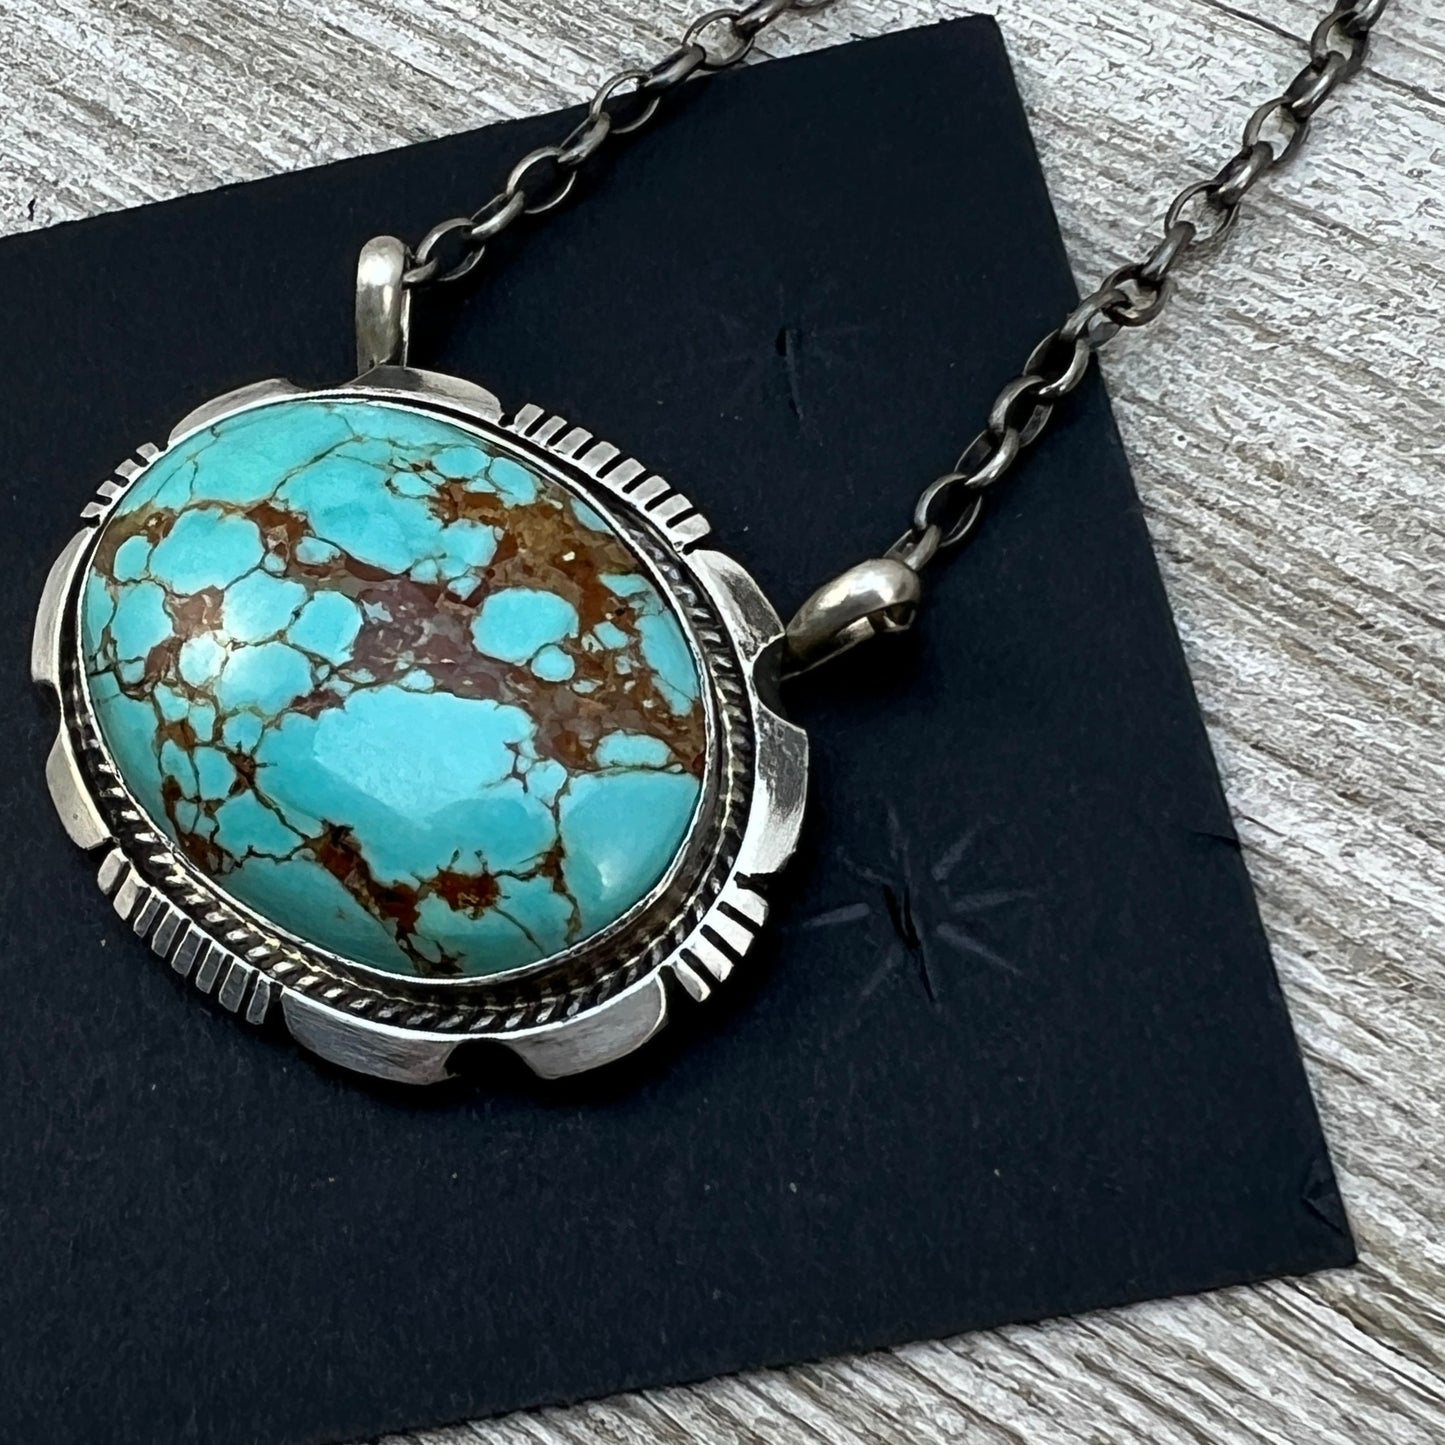 17" Spiderweb turquoise necklace #2, #8 turquoise, sterling silver choker, Navajo handmade by Alfred Martinez, signed